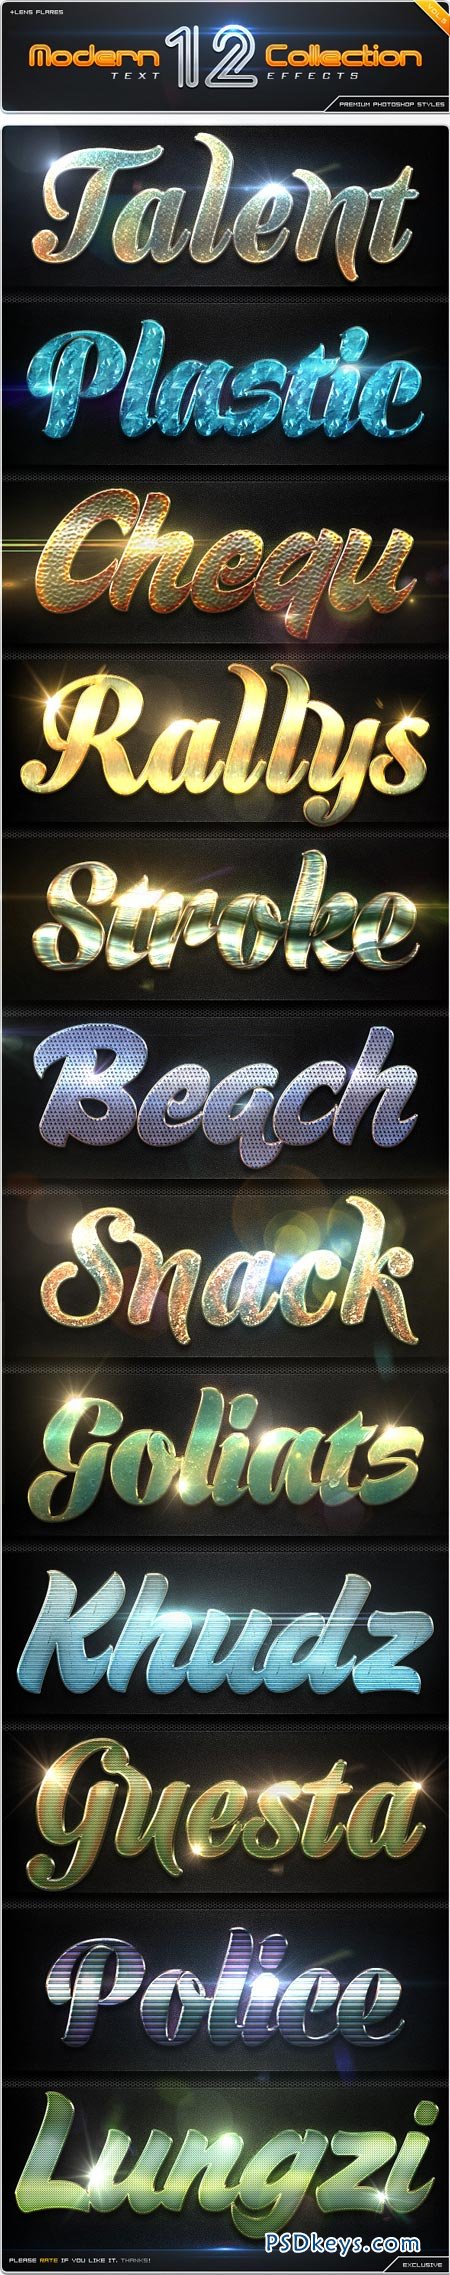 12 Modern Collection Text Effect Styles Vol.5 8864278